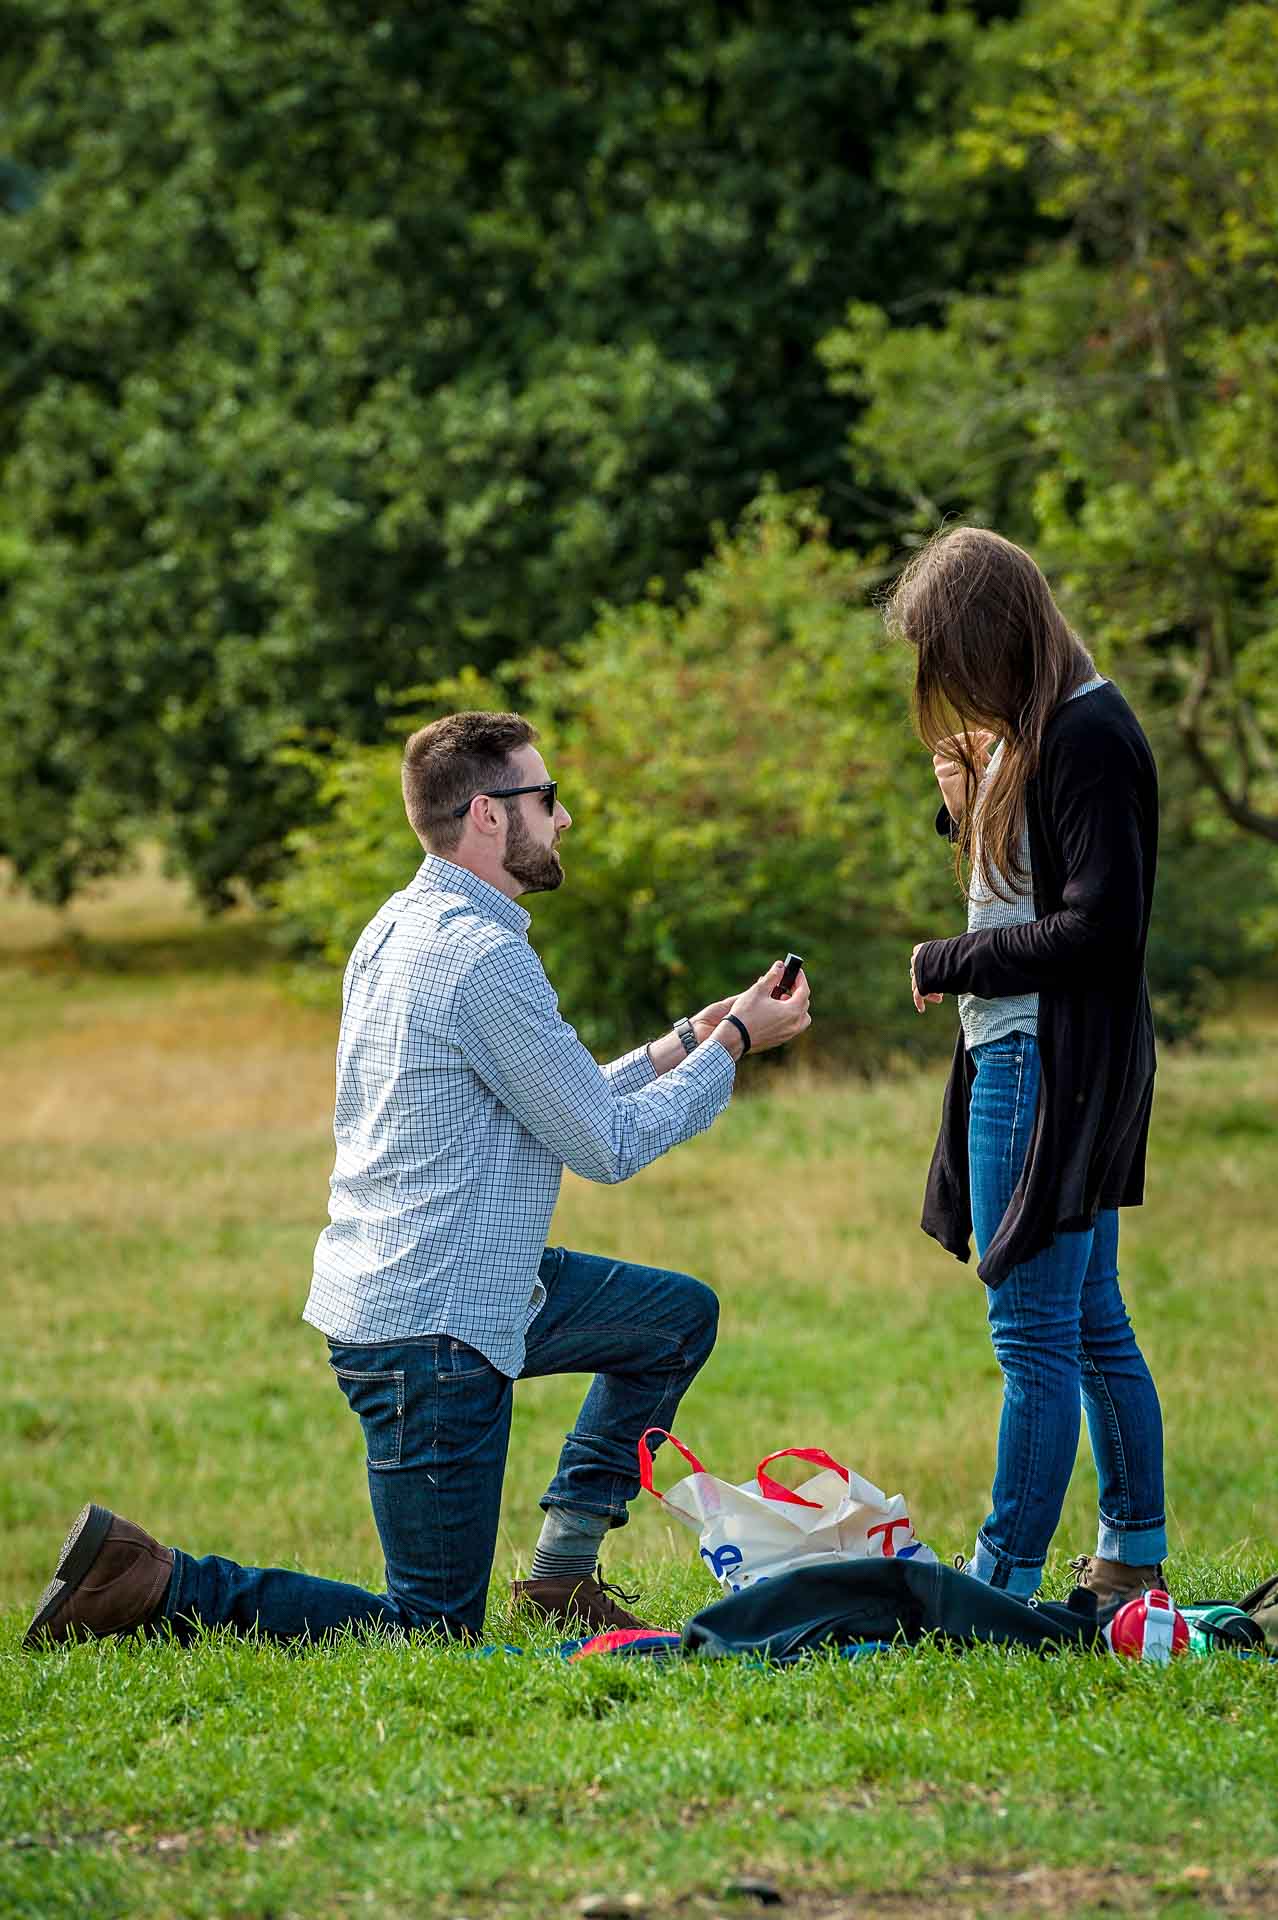 Man proposing to girlfriend - Proposal photography in London